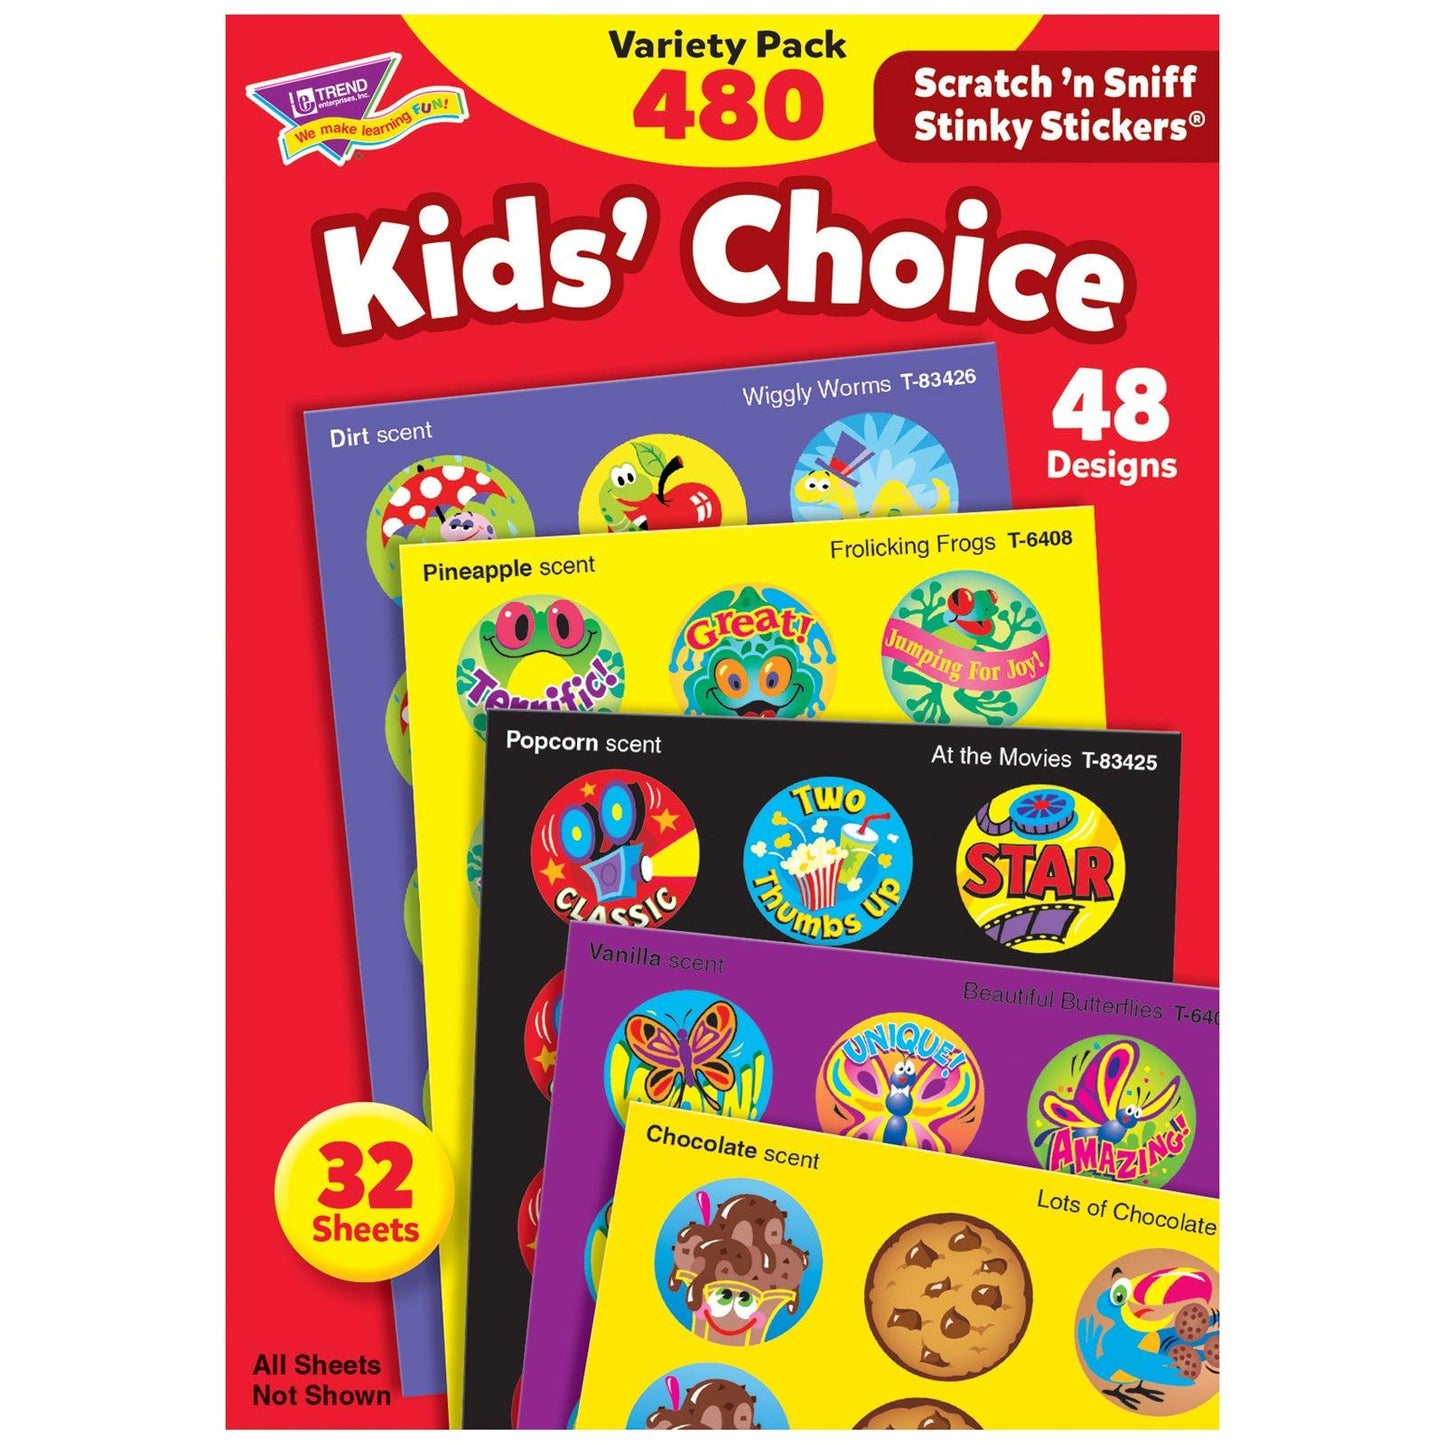 Kids' Choice Stinky Stickers® Variety Pack, 480 ct - Loomini